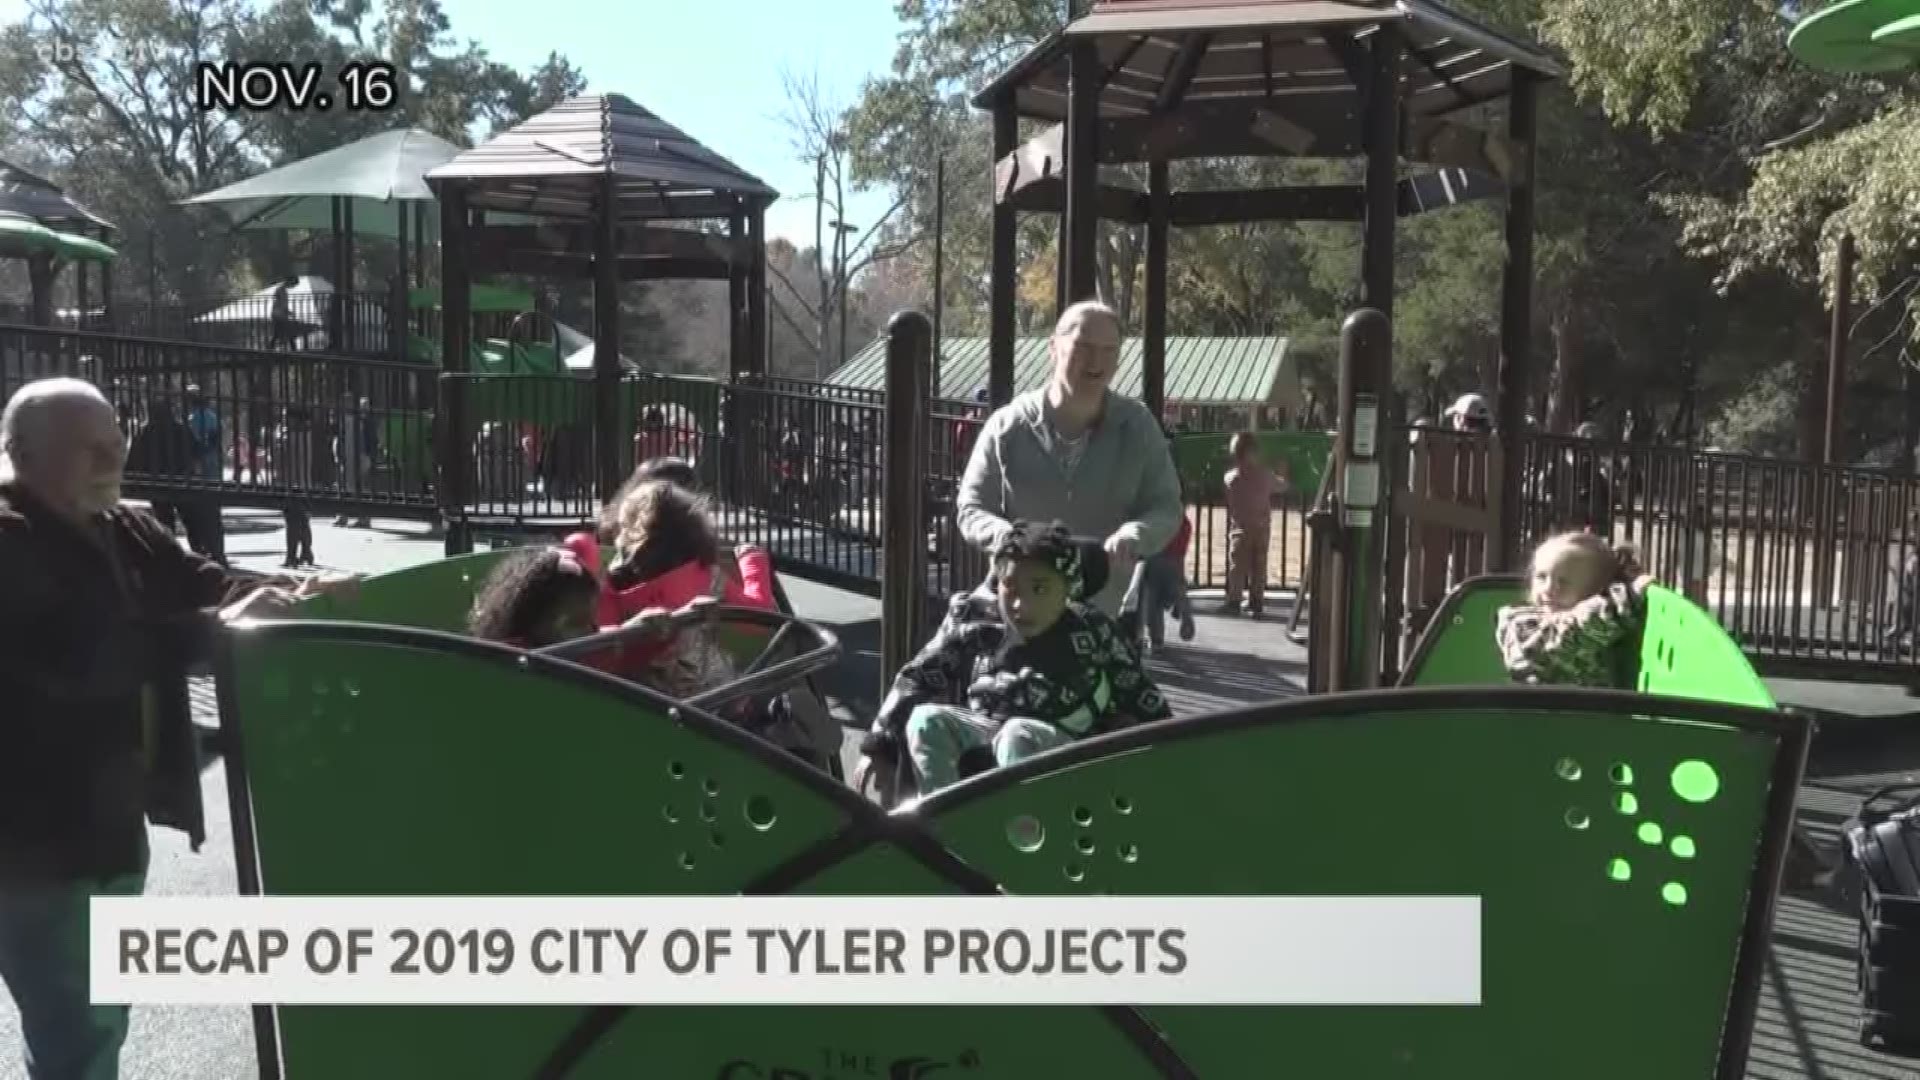 The city of Tyler had a number of projects completed in 2019, particularly for the city's park system.